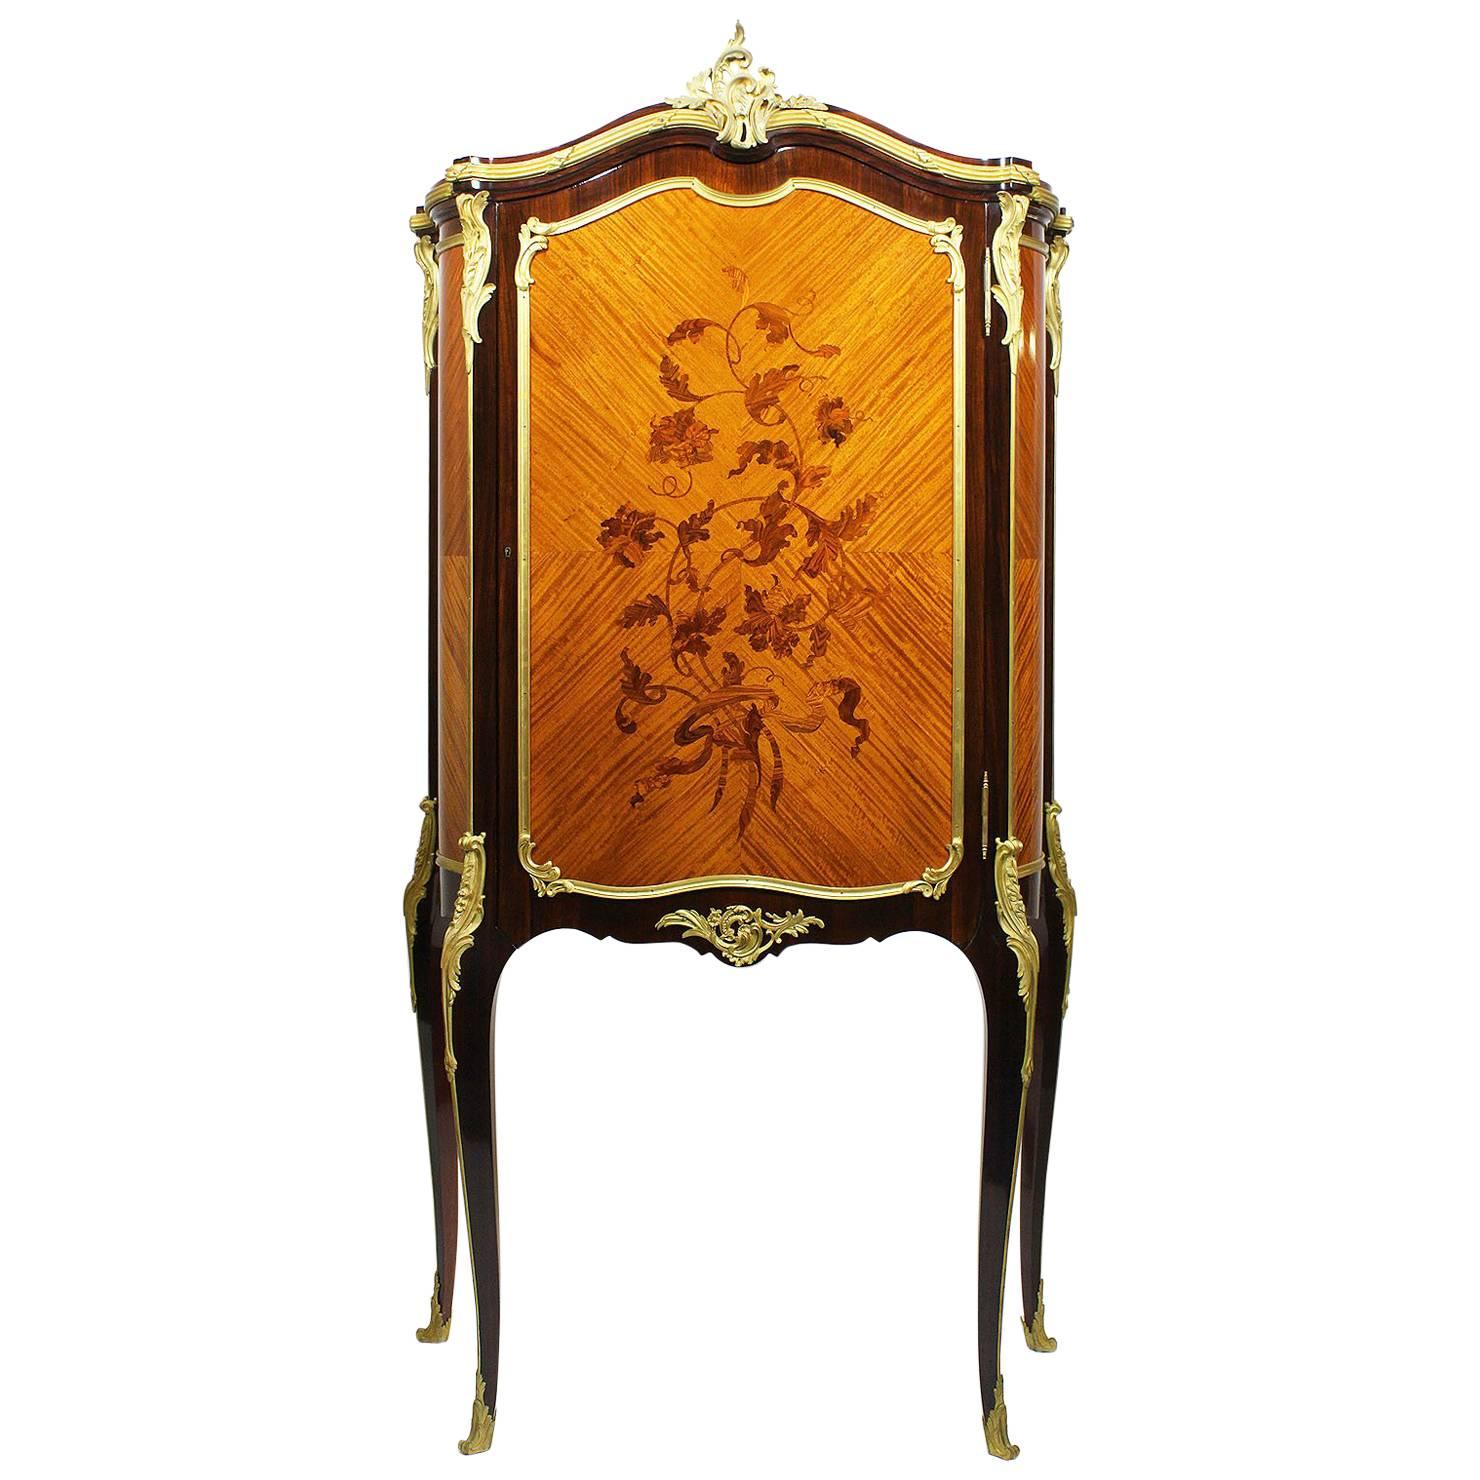 French 19th-20th Century Louis XV Style Gilt-Bronze Mounted & Marquetry Cabinet